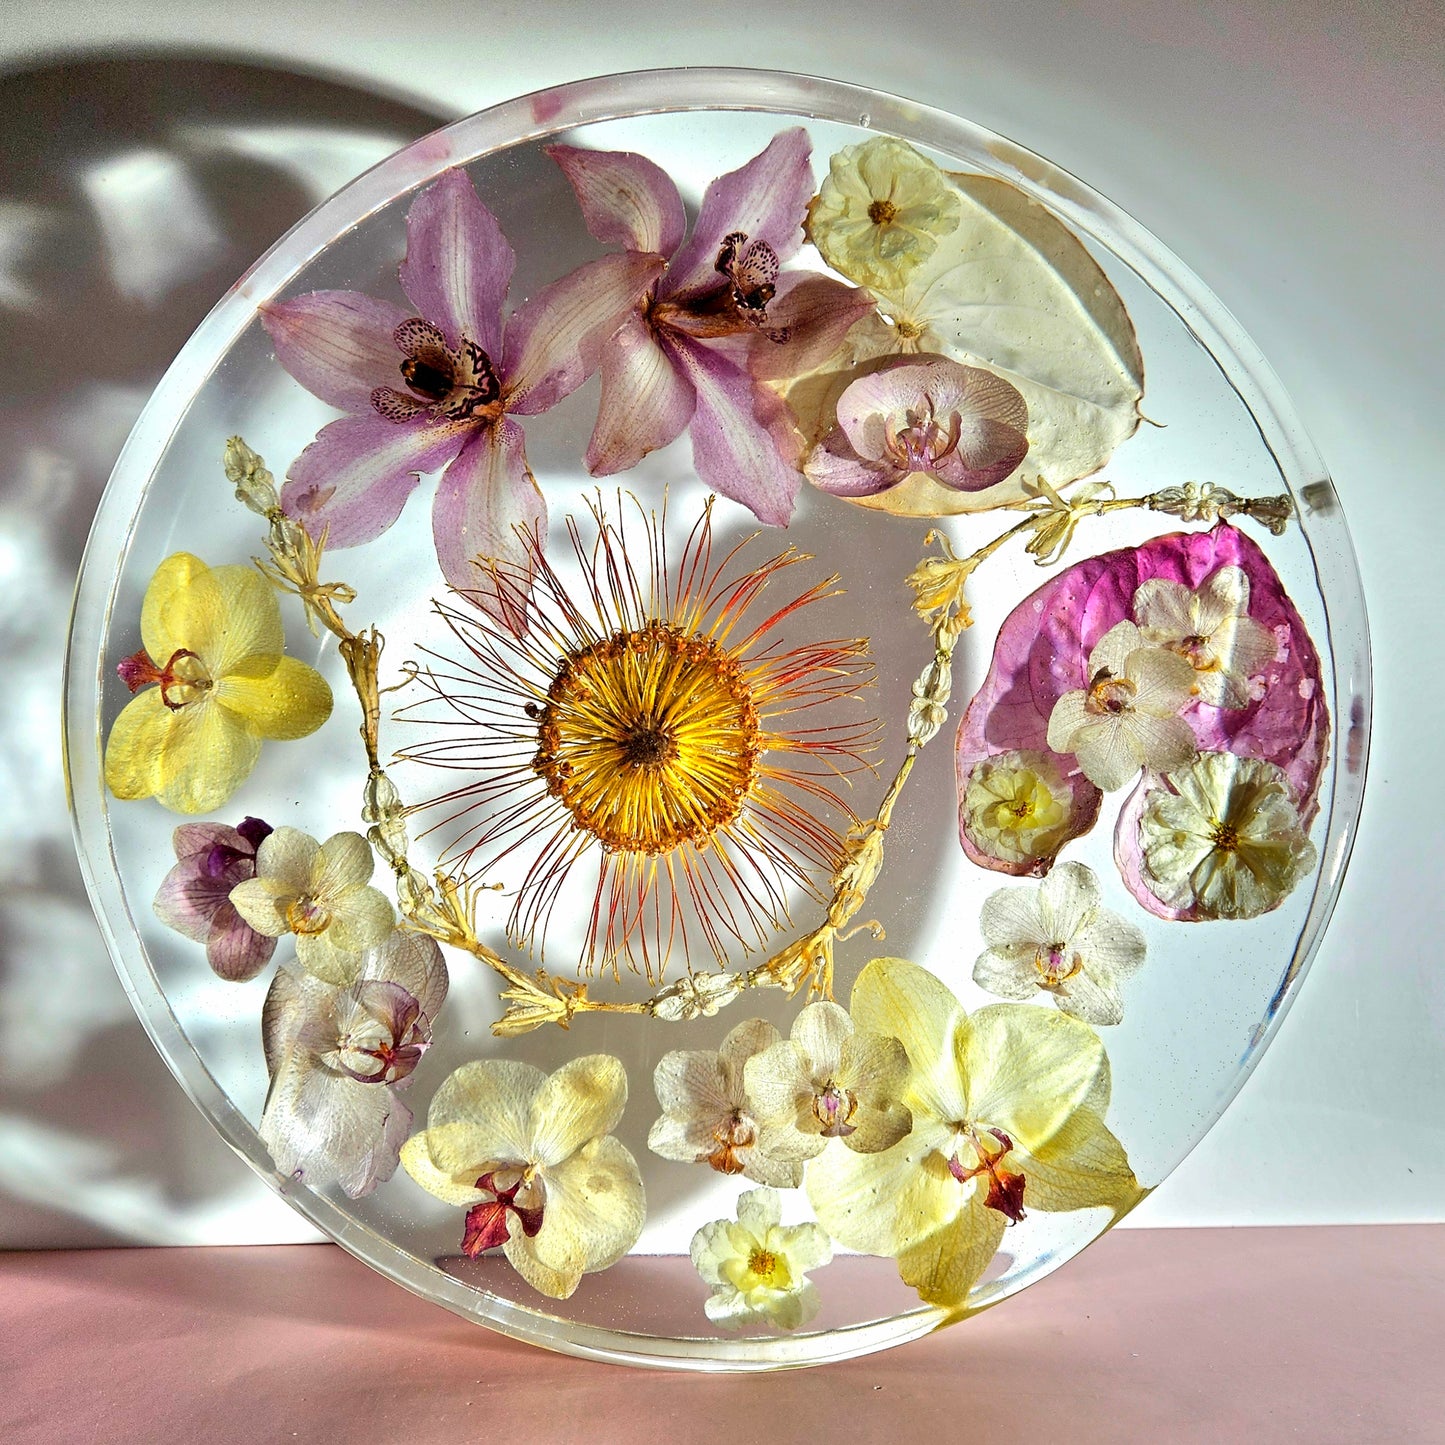 14" Round Extra Large 3D Resin Wedding Bouquet Preservation Keepsake Gift Save Your Wedding Flowers Forever